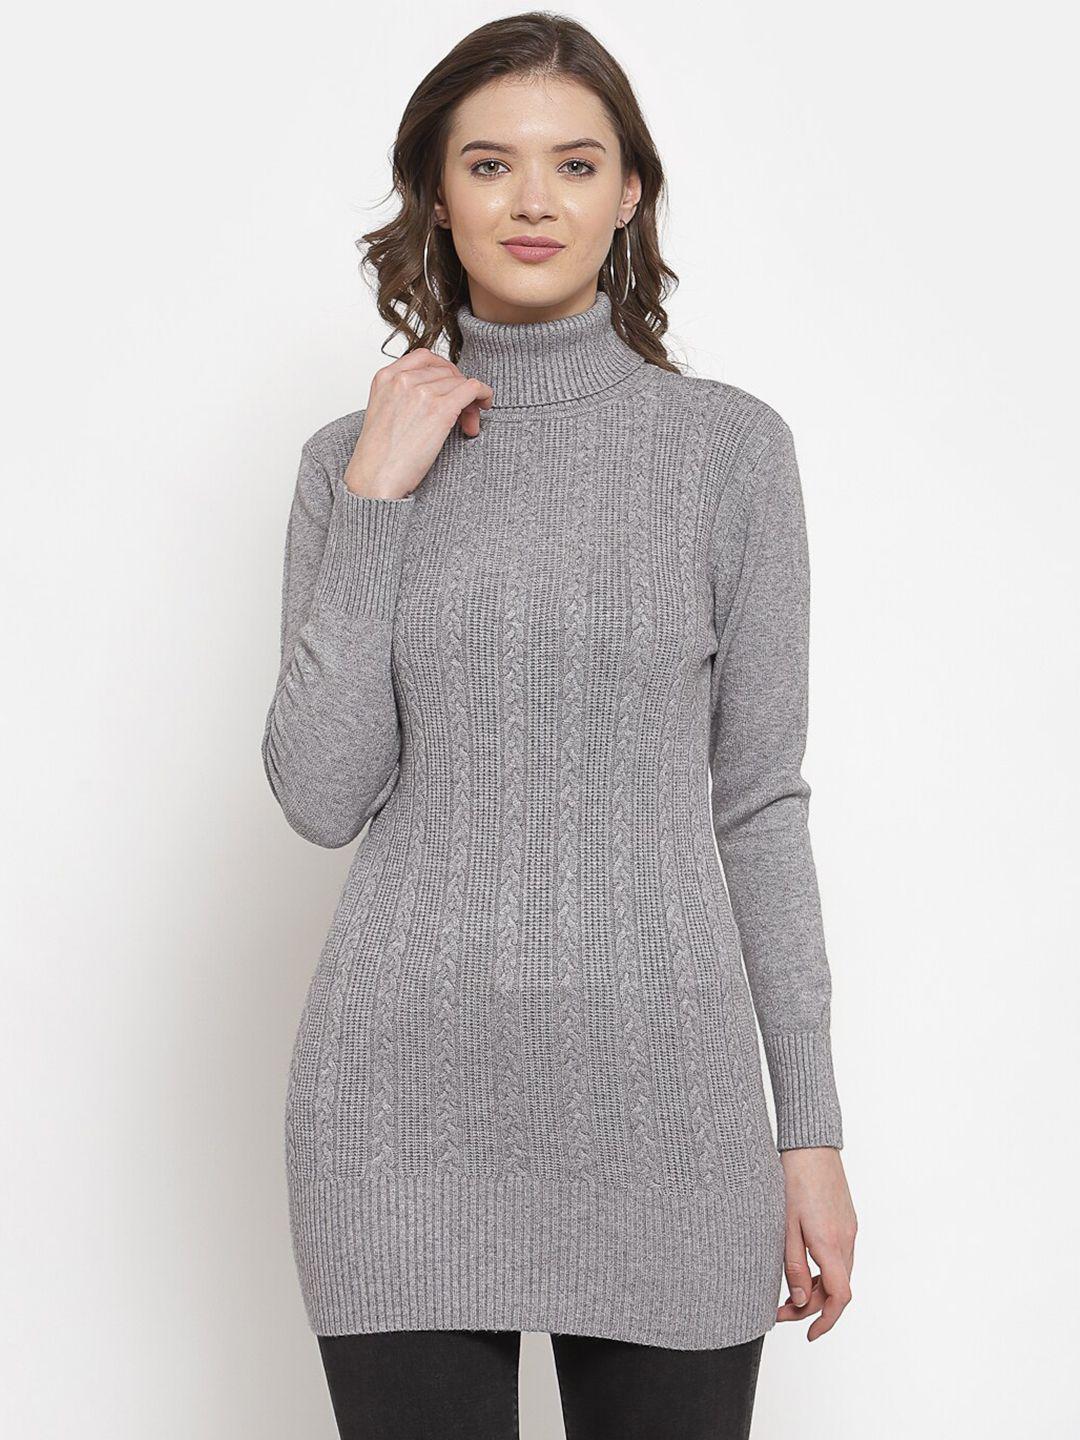 mafadeny-women-grey-cable-knit-longline-pullover-sweater